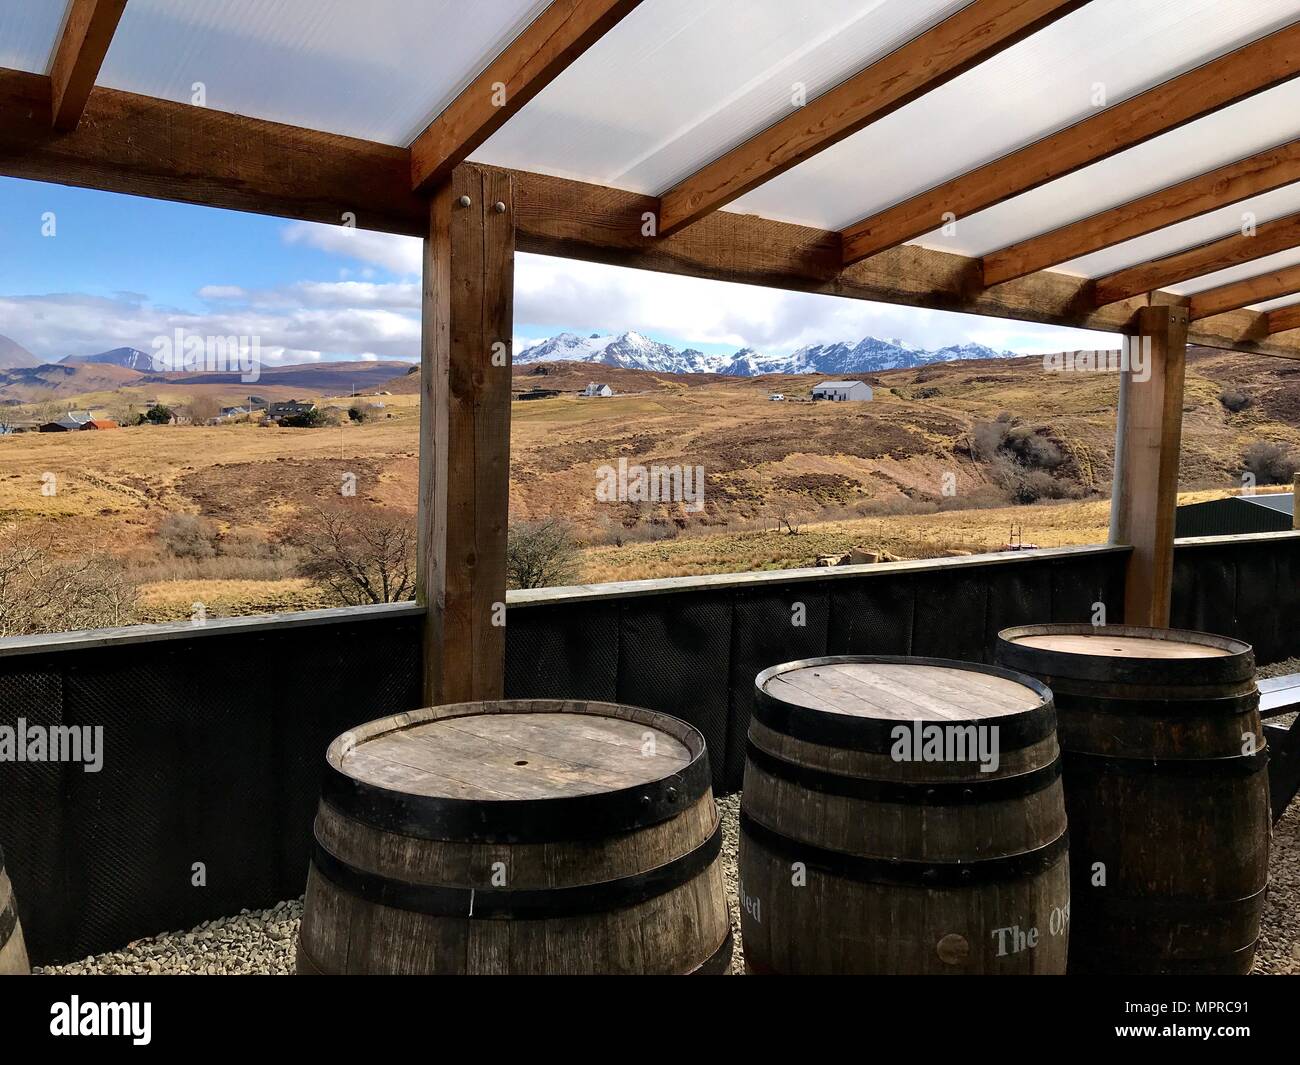 Cuillin Hills mountain view from The Oyster Shed Restaurant on Isle of Skye, Scotland near Talisker Distillery Stock Photo